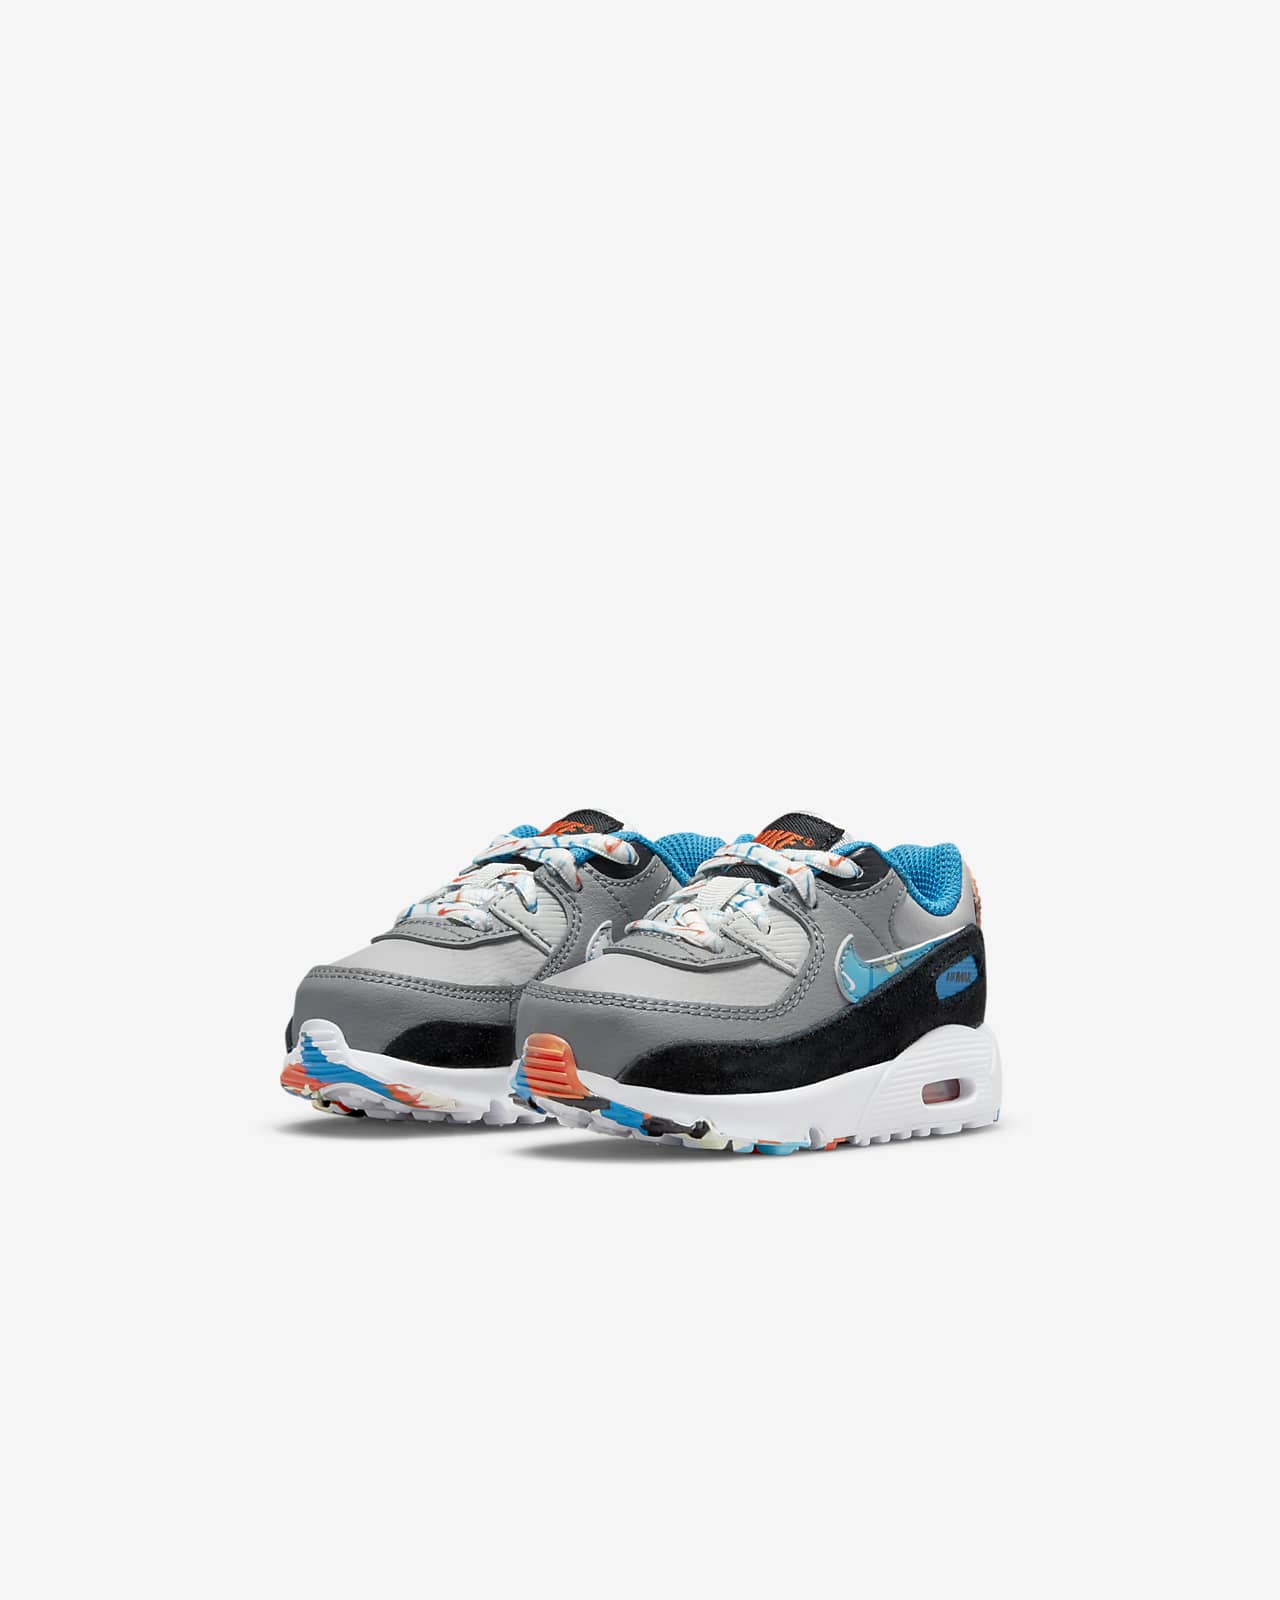 Nike Air Max 90 LTR Baby/Toddler Shoes in Grey, Size: 5C | DM7596-001